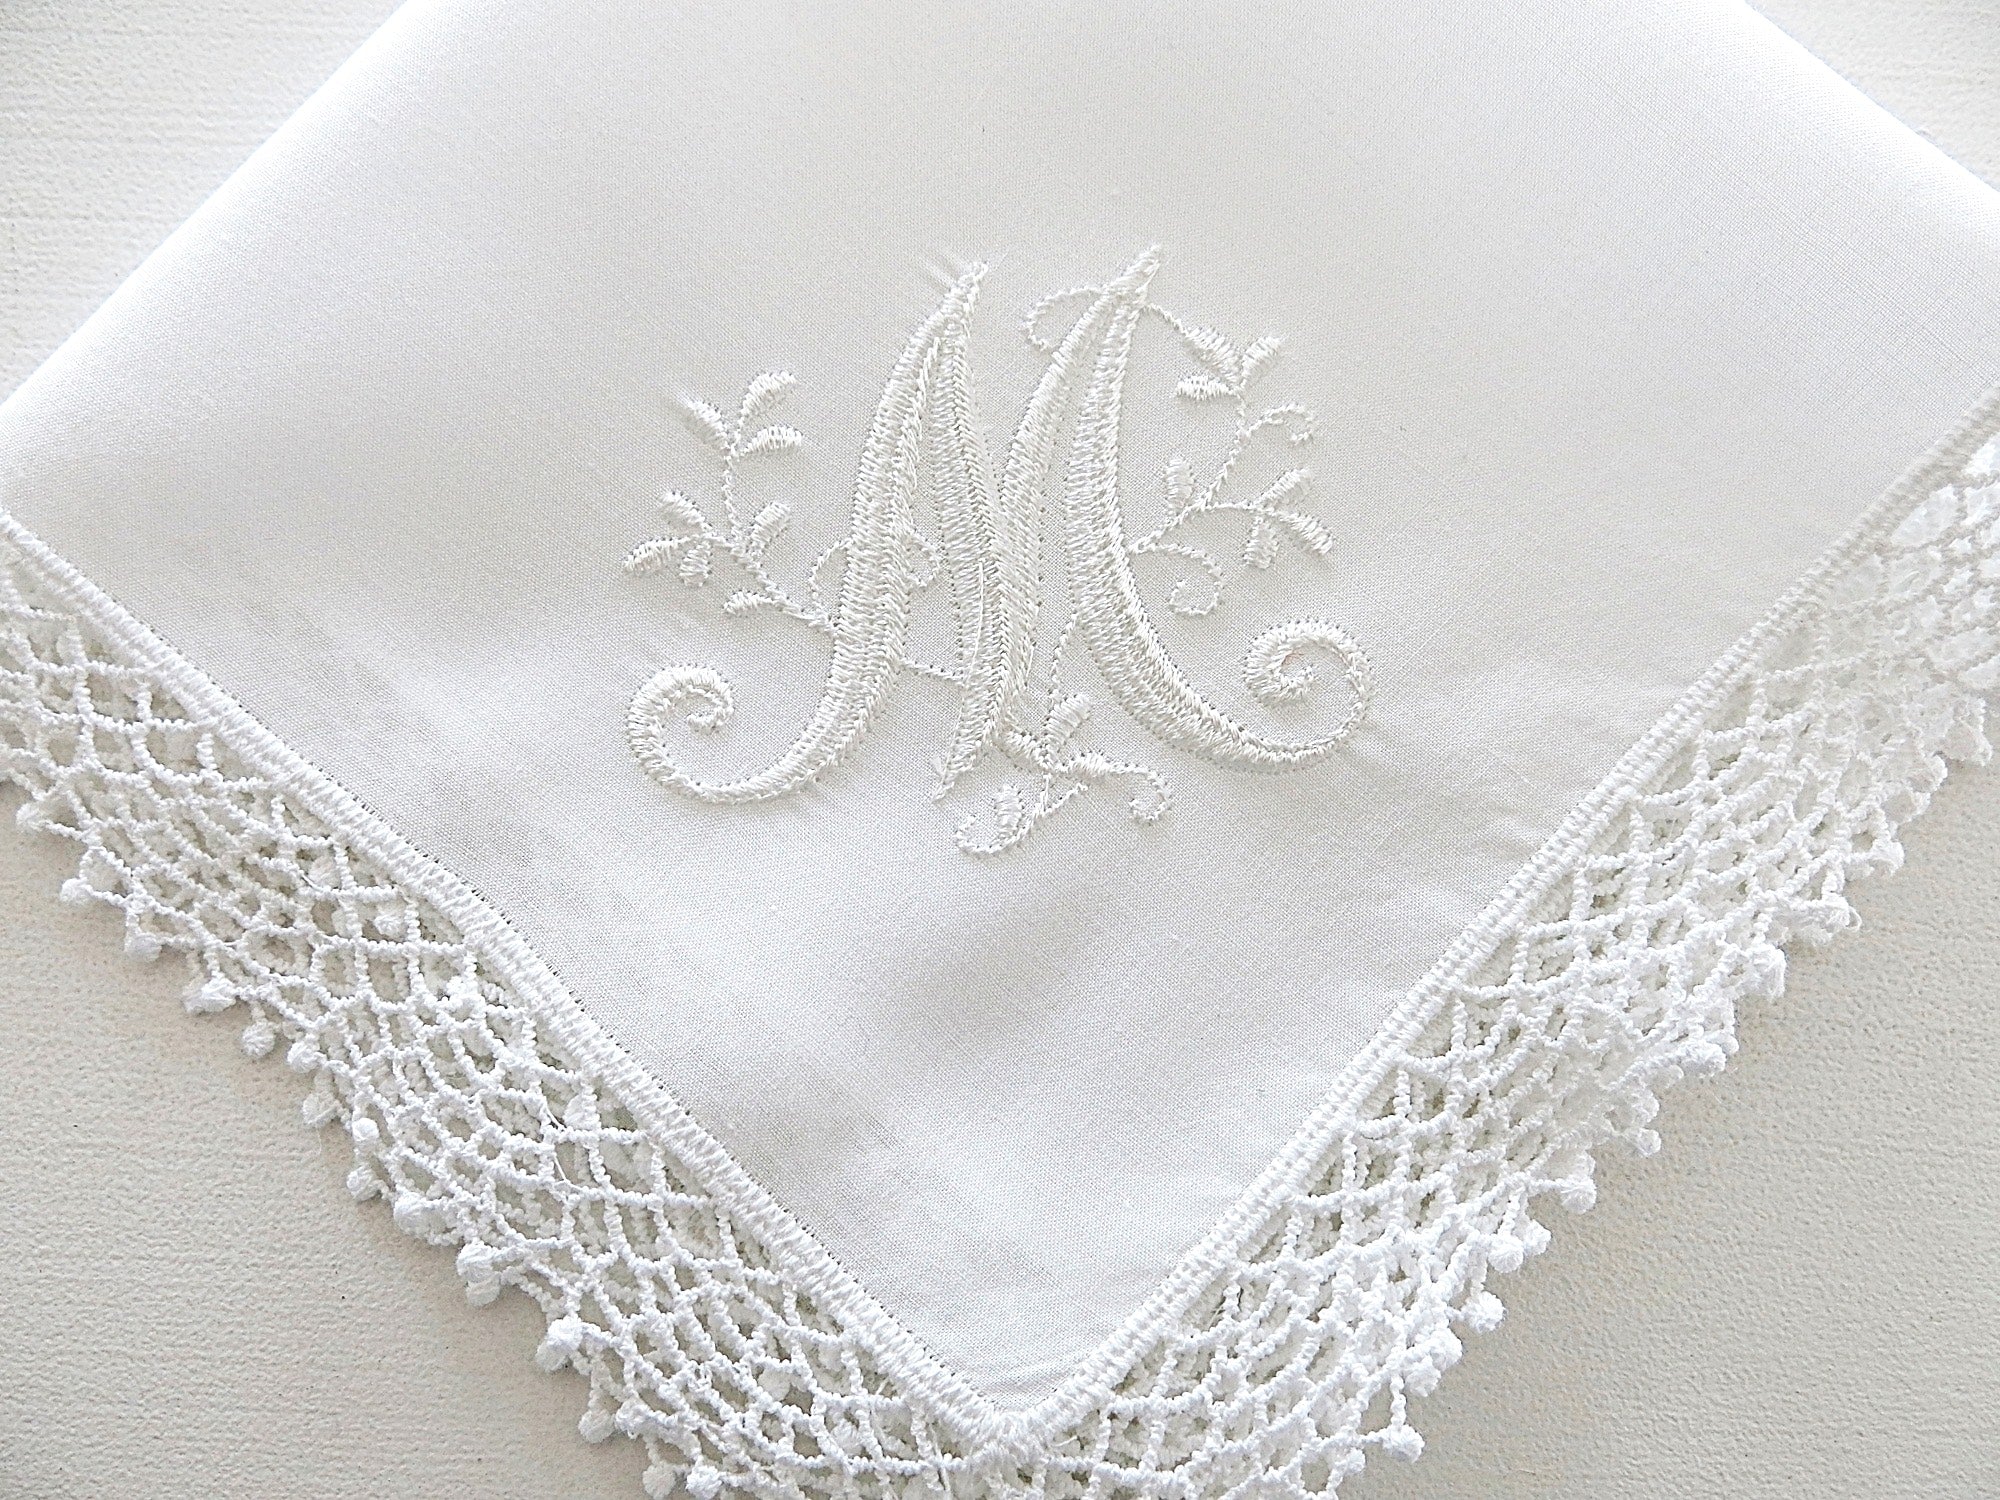 Pretty Wedding Handkerchief for the Bride with Floral Design 1 Initial Monogram & Date